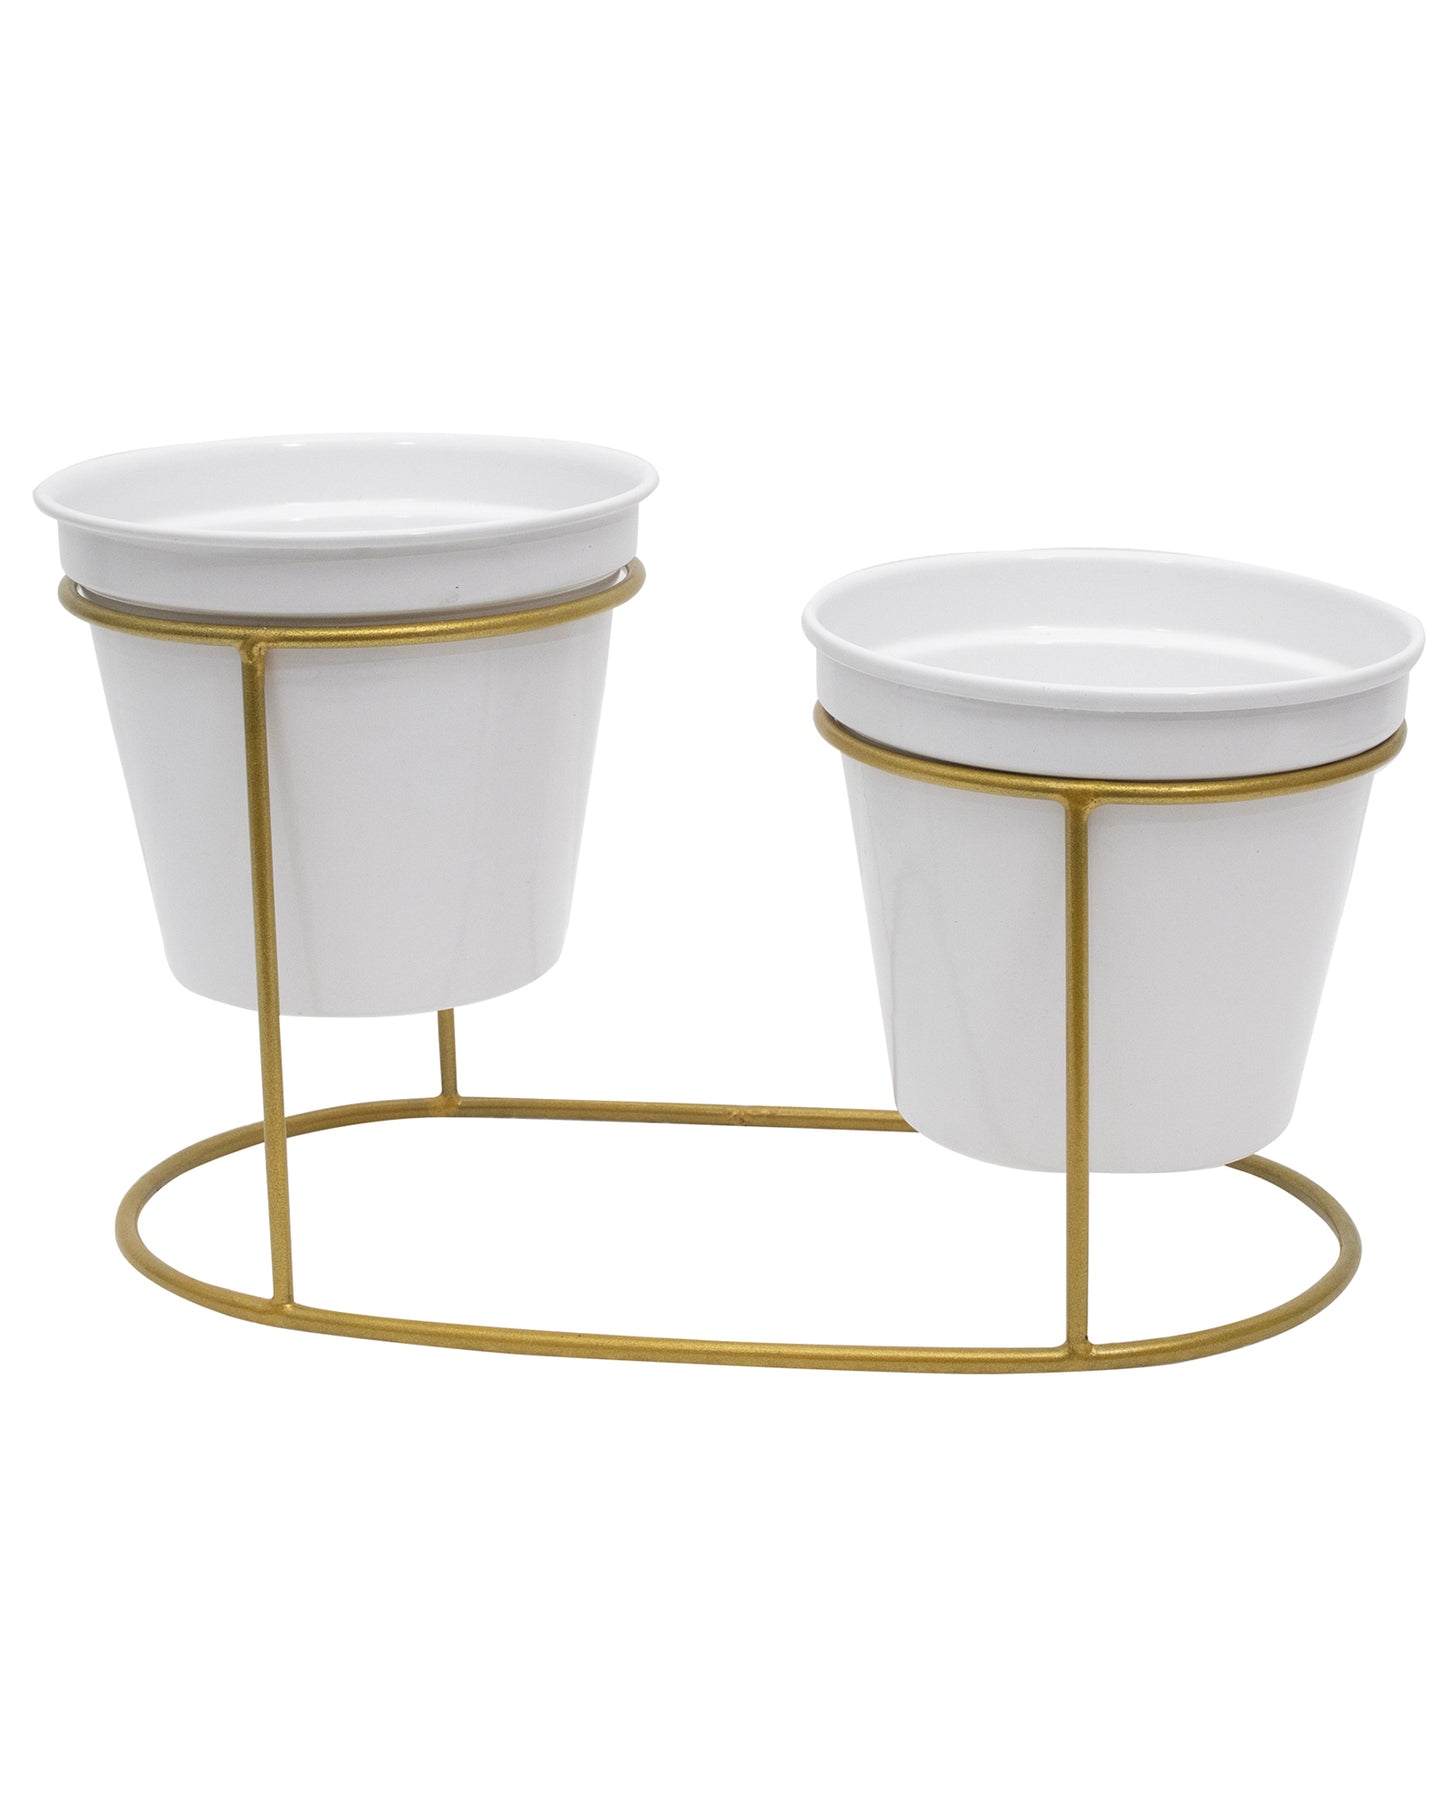 Combo of 2 Table Top Designer Metallic Gold Metal Stand with Planters, Small White Metal Pots for Livingroom, Balcony & Home Decoration, Twin Oval Planter